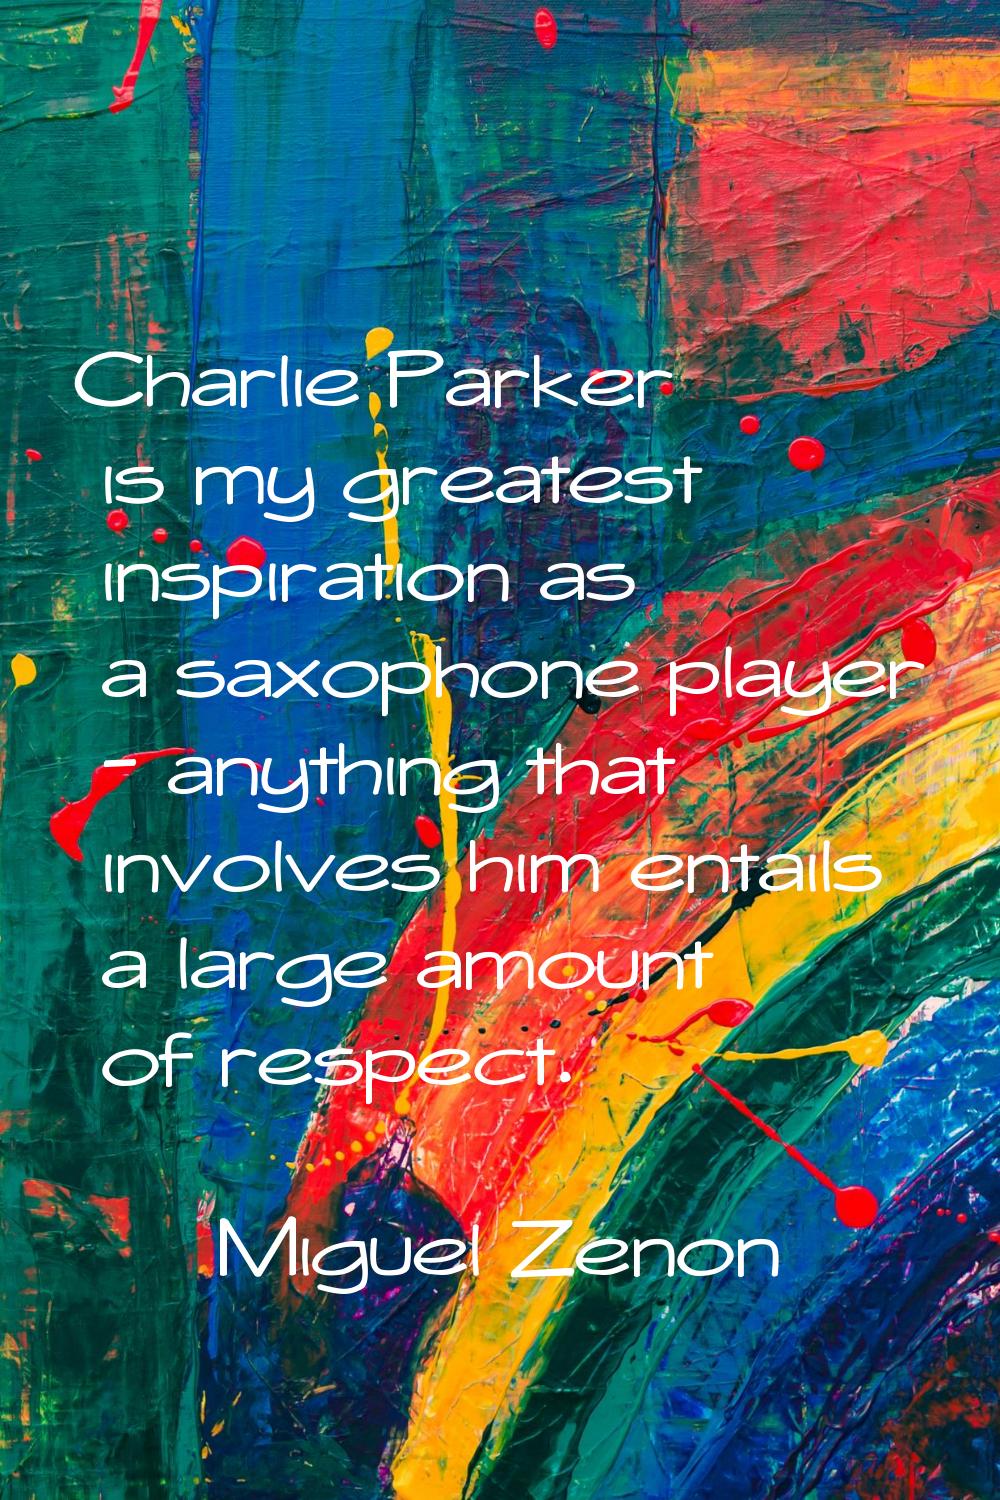 Charlie Parker is my greatest inspiration as a saxophone player - anything that involves him entail